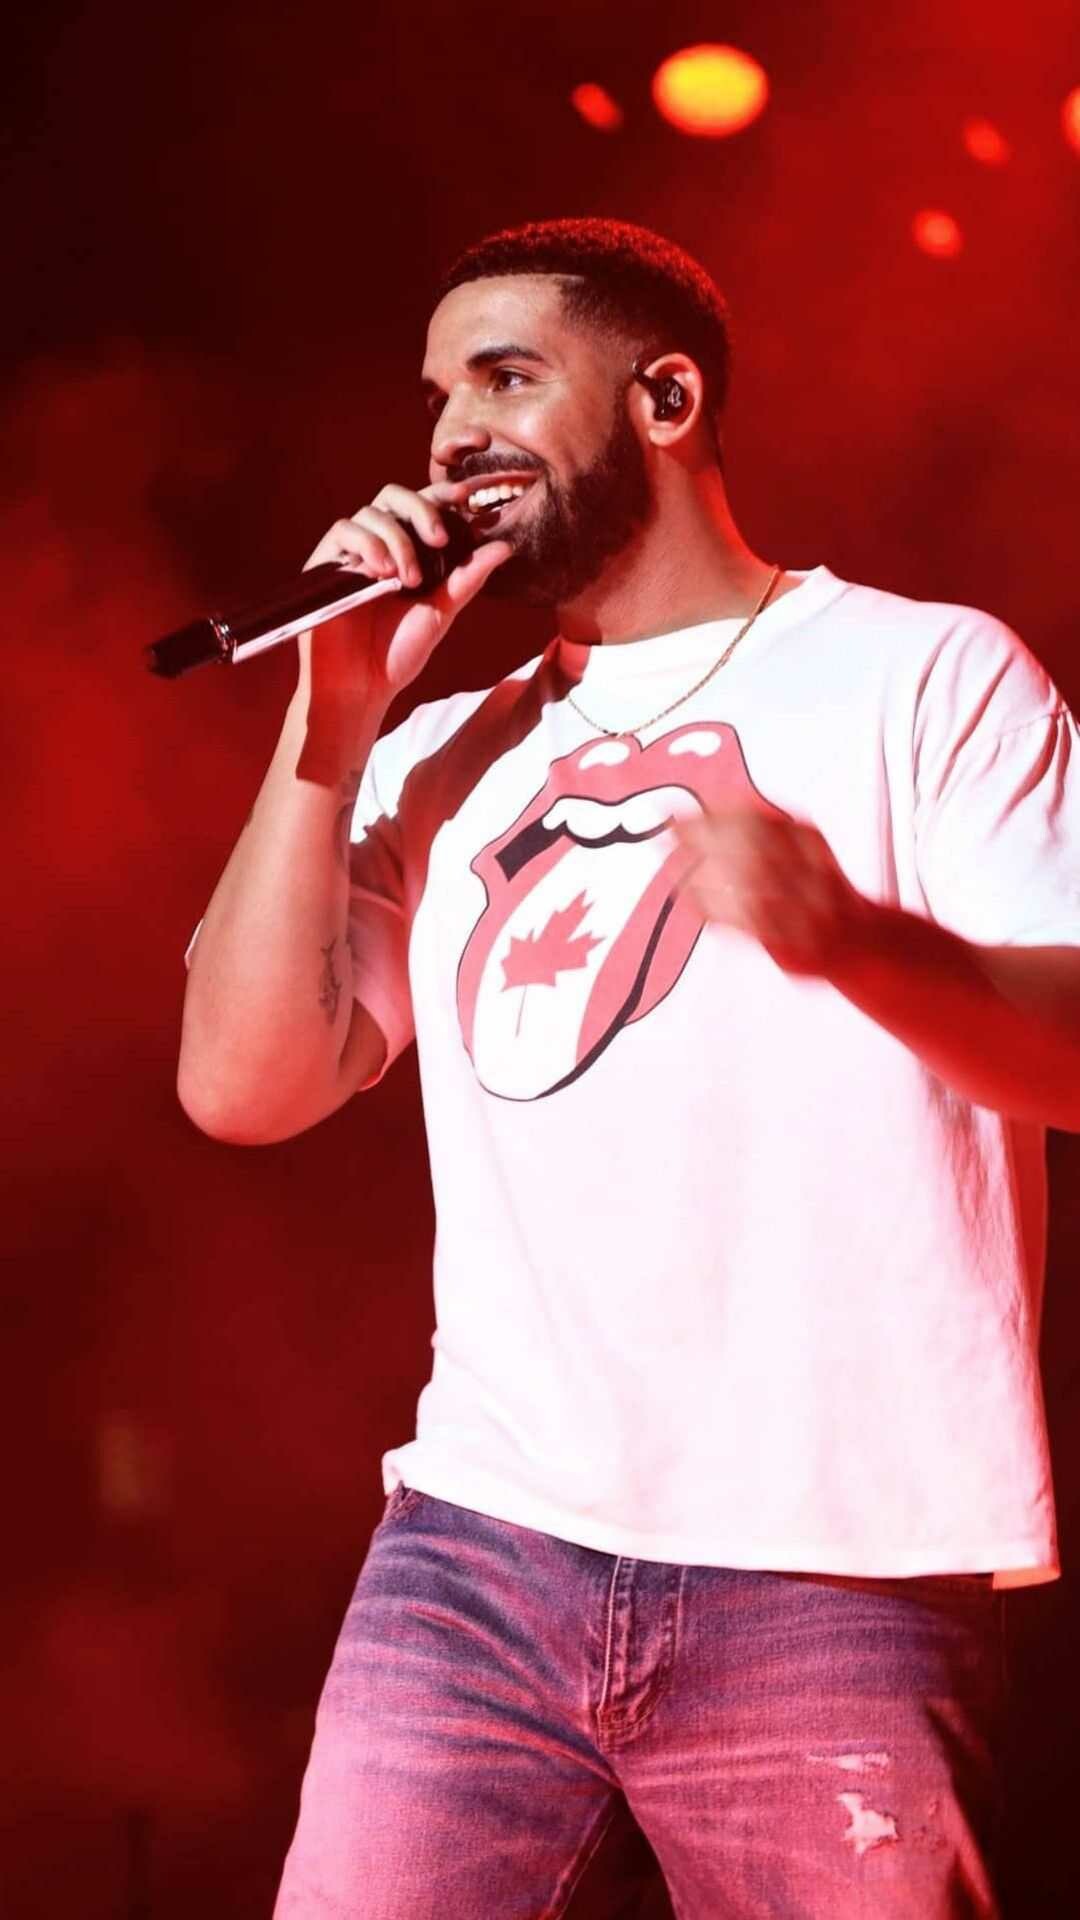 Drake: “Find Your Love”, Certified Platinum by the Recording Industry Association of America. 1080x1920 Full HD Wallpaper.